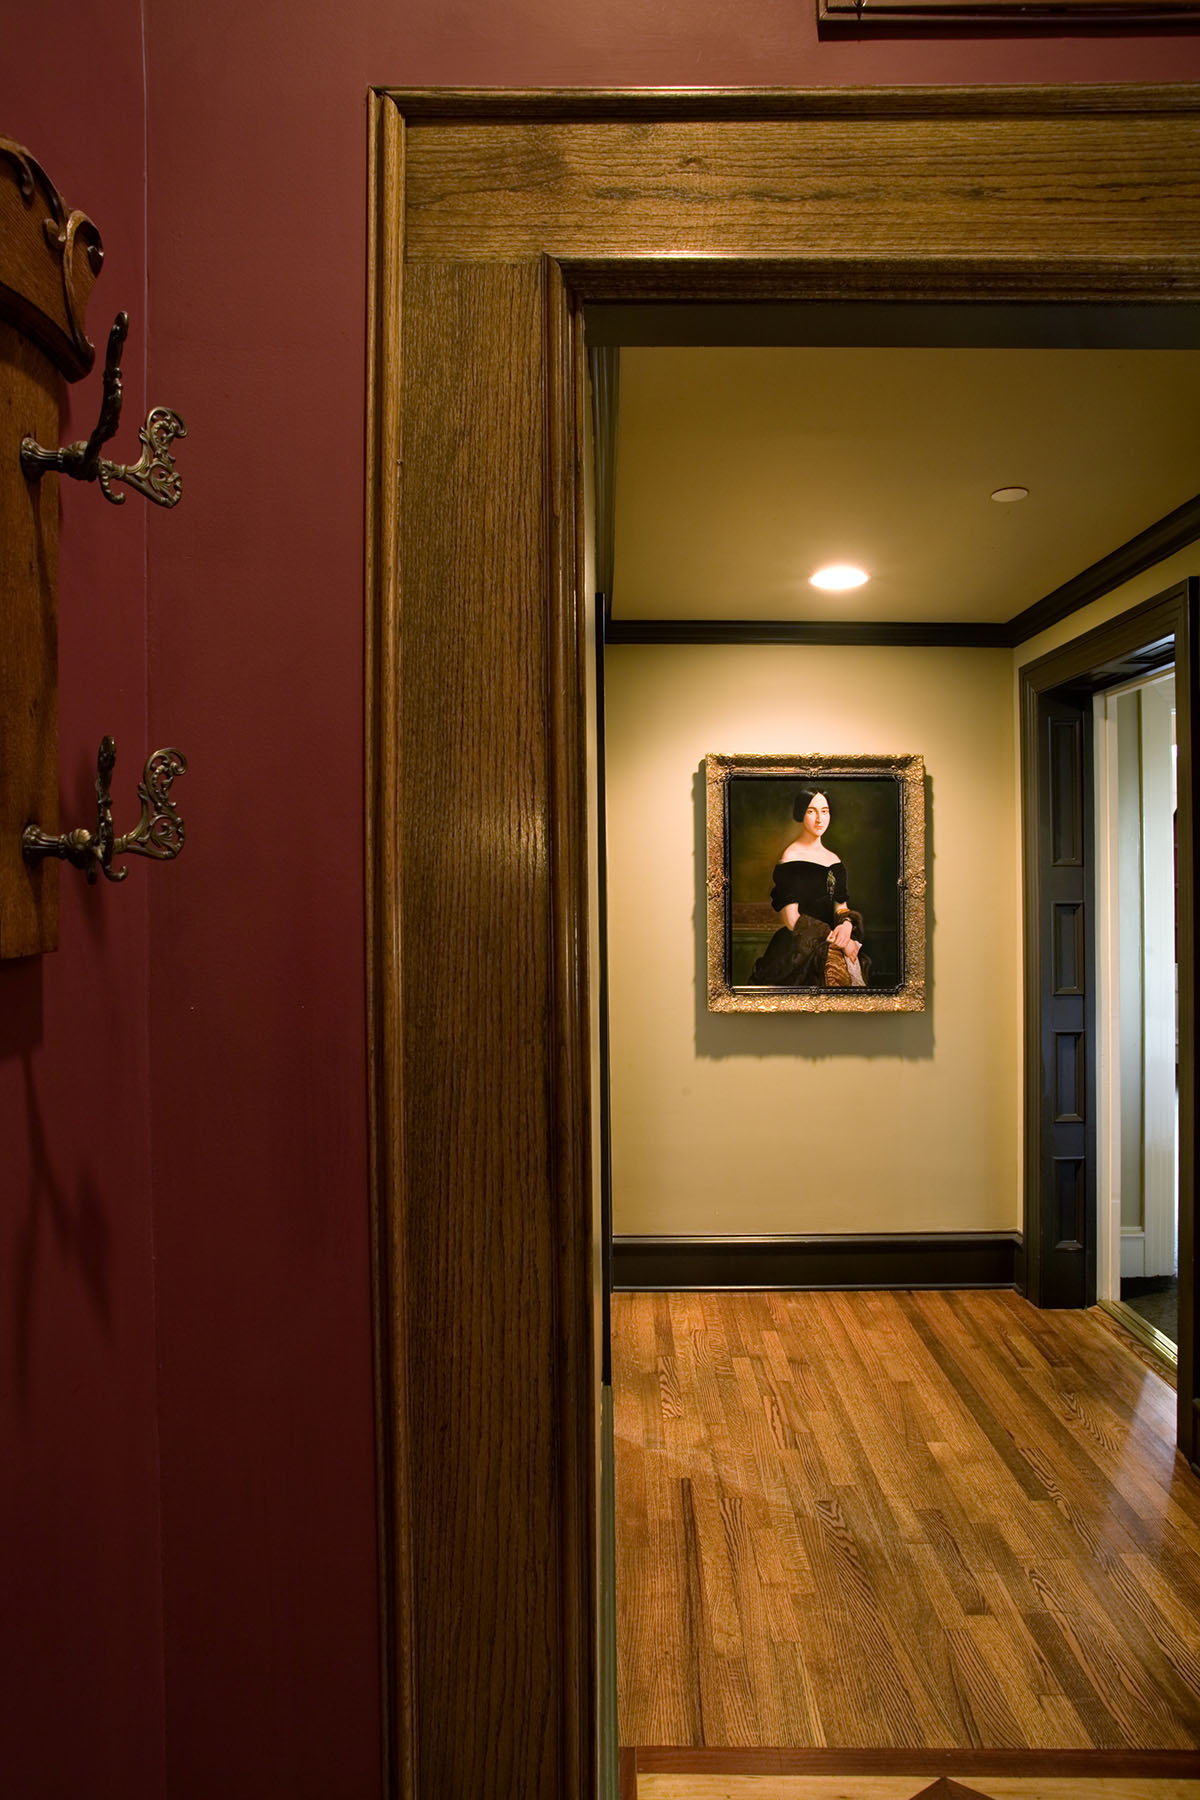 Rich wood trim and flooring is accented by a red painted wall and a large portrait painting of a woman in a black dress